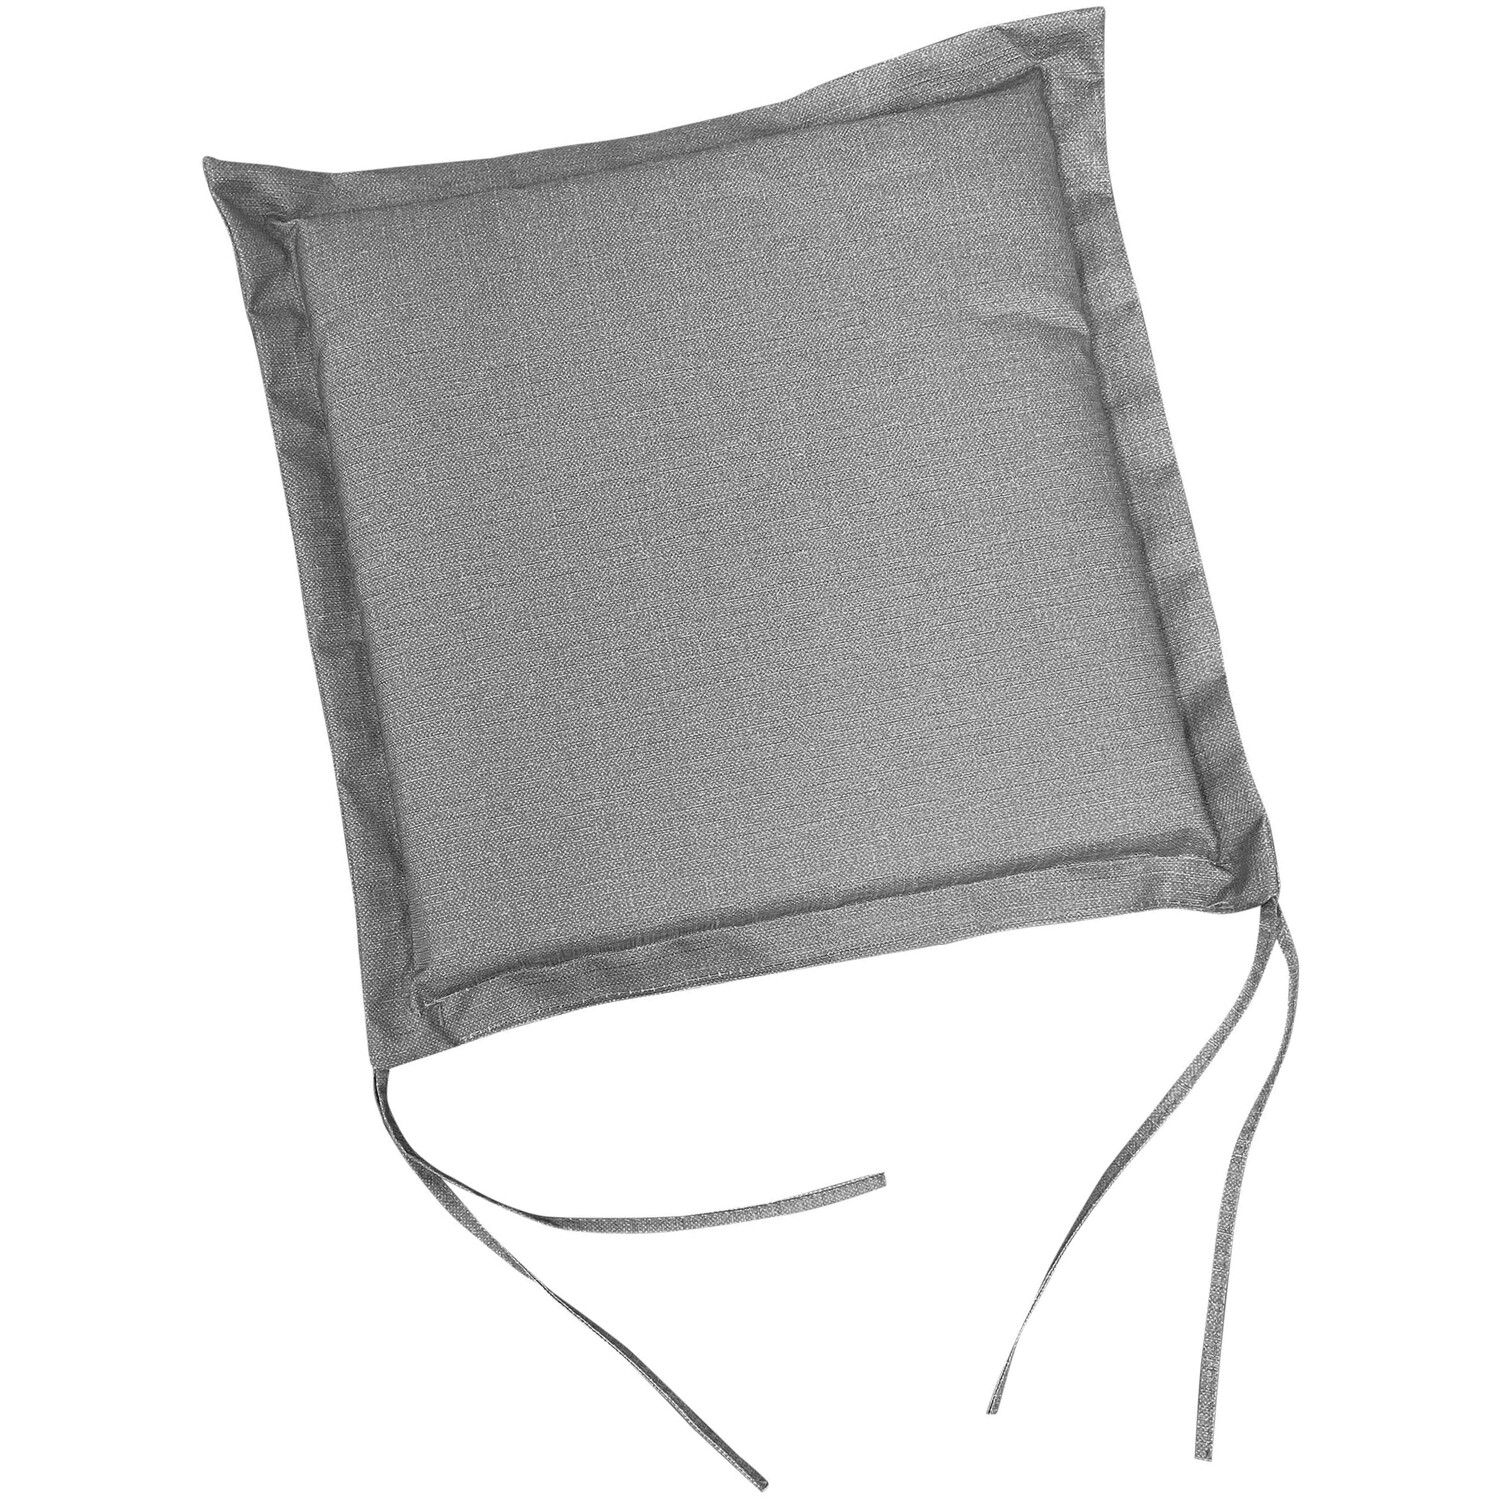 Malay Pack of 2 Seat Pads - Taupe Image